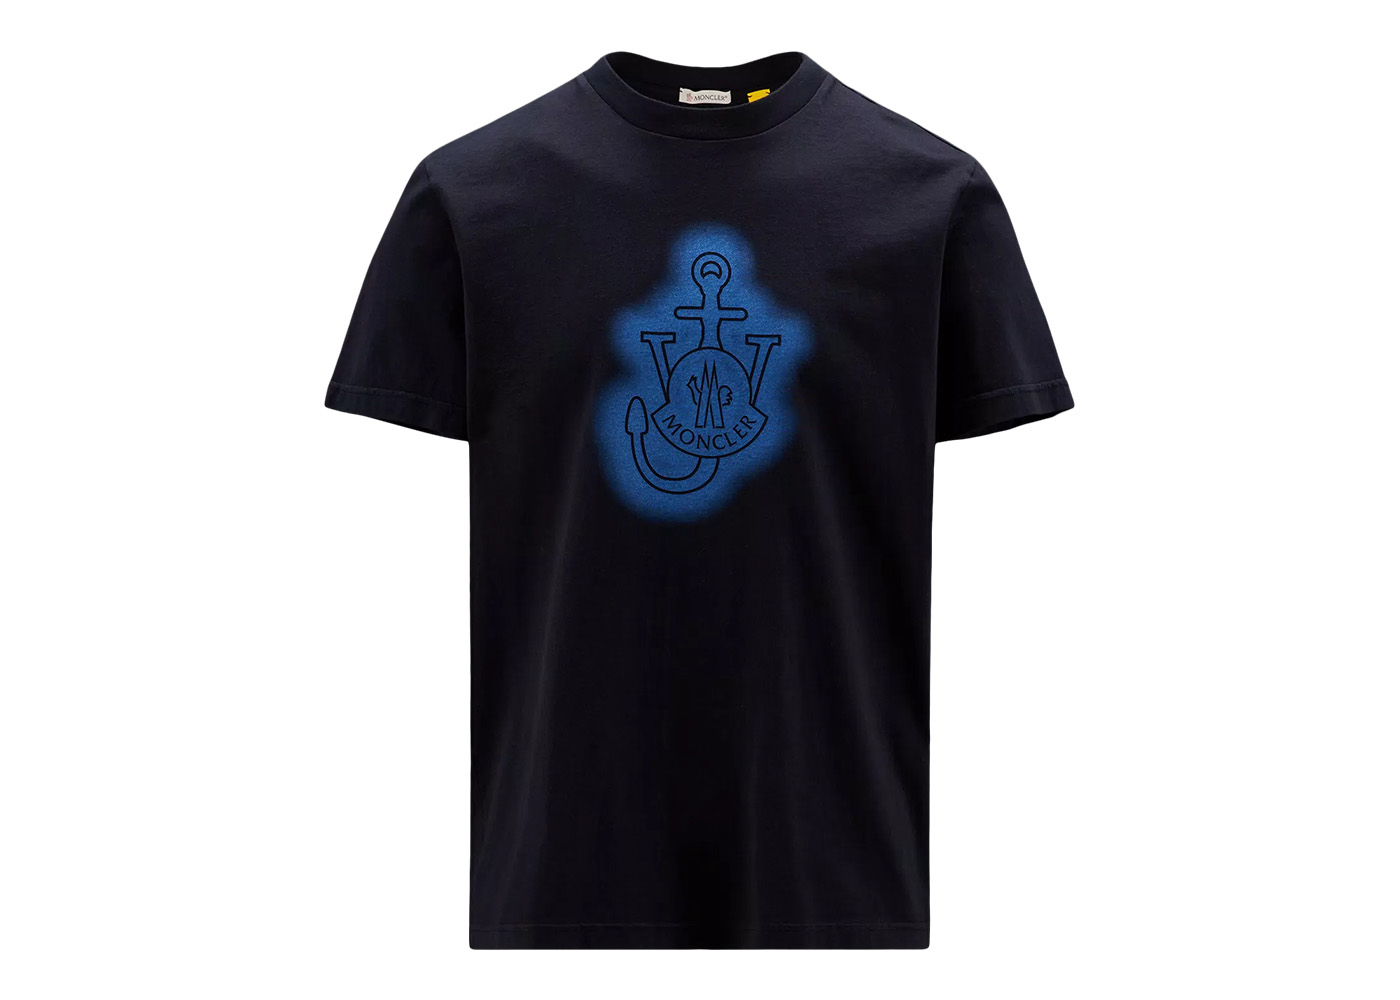 MONCLER ×JW ANDERSON ロゴTシャツ検討いたします